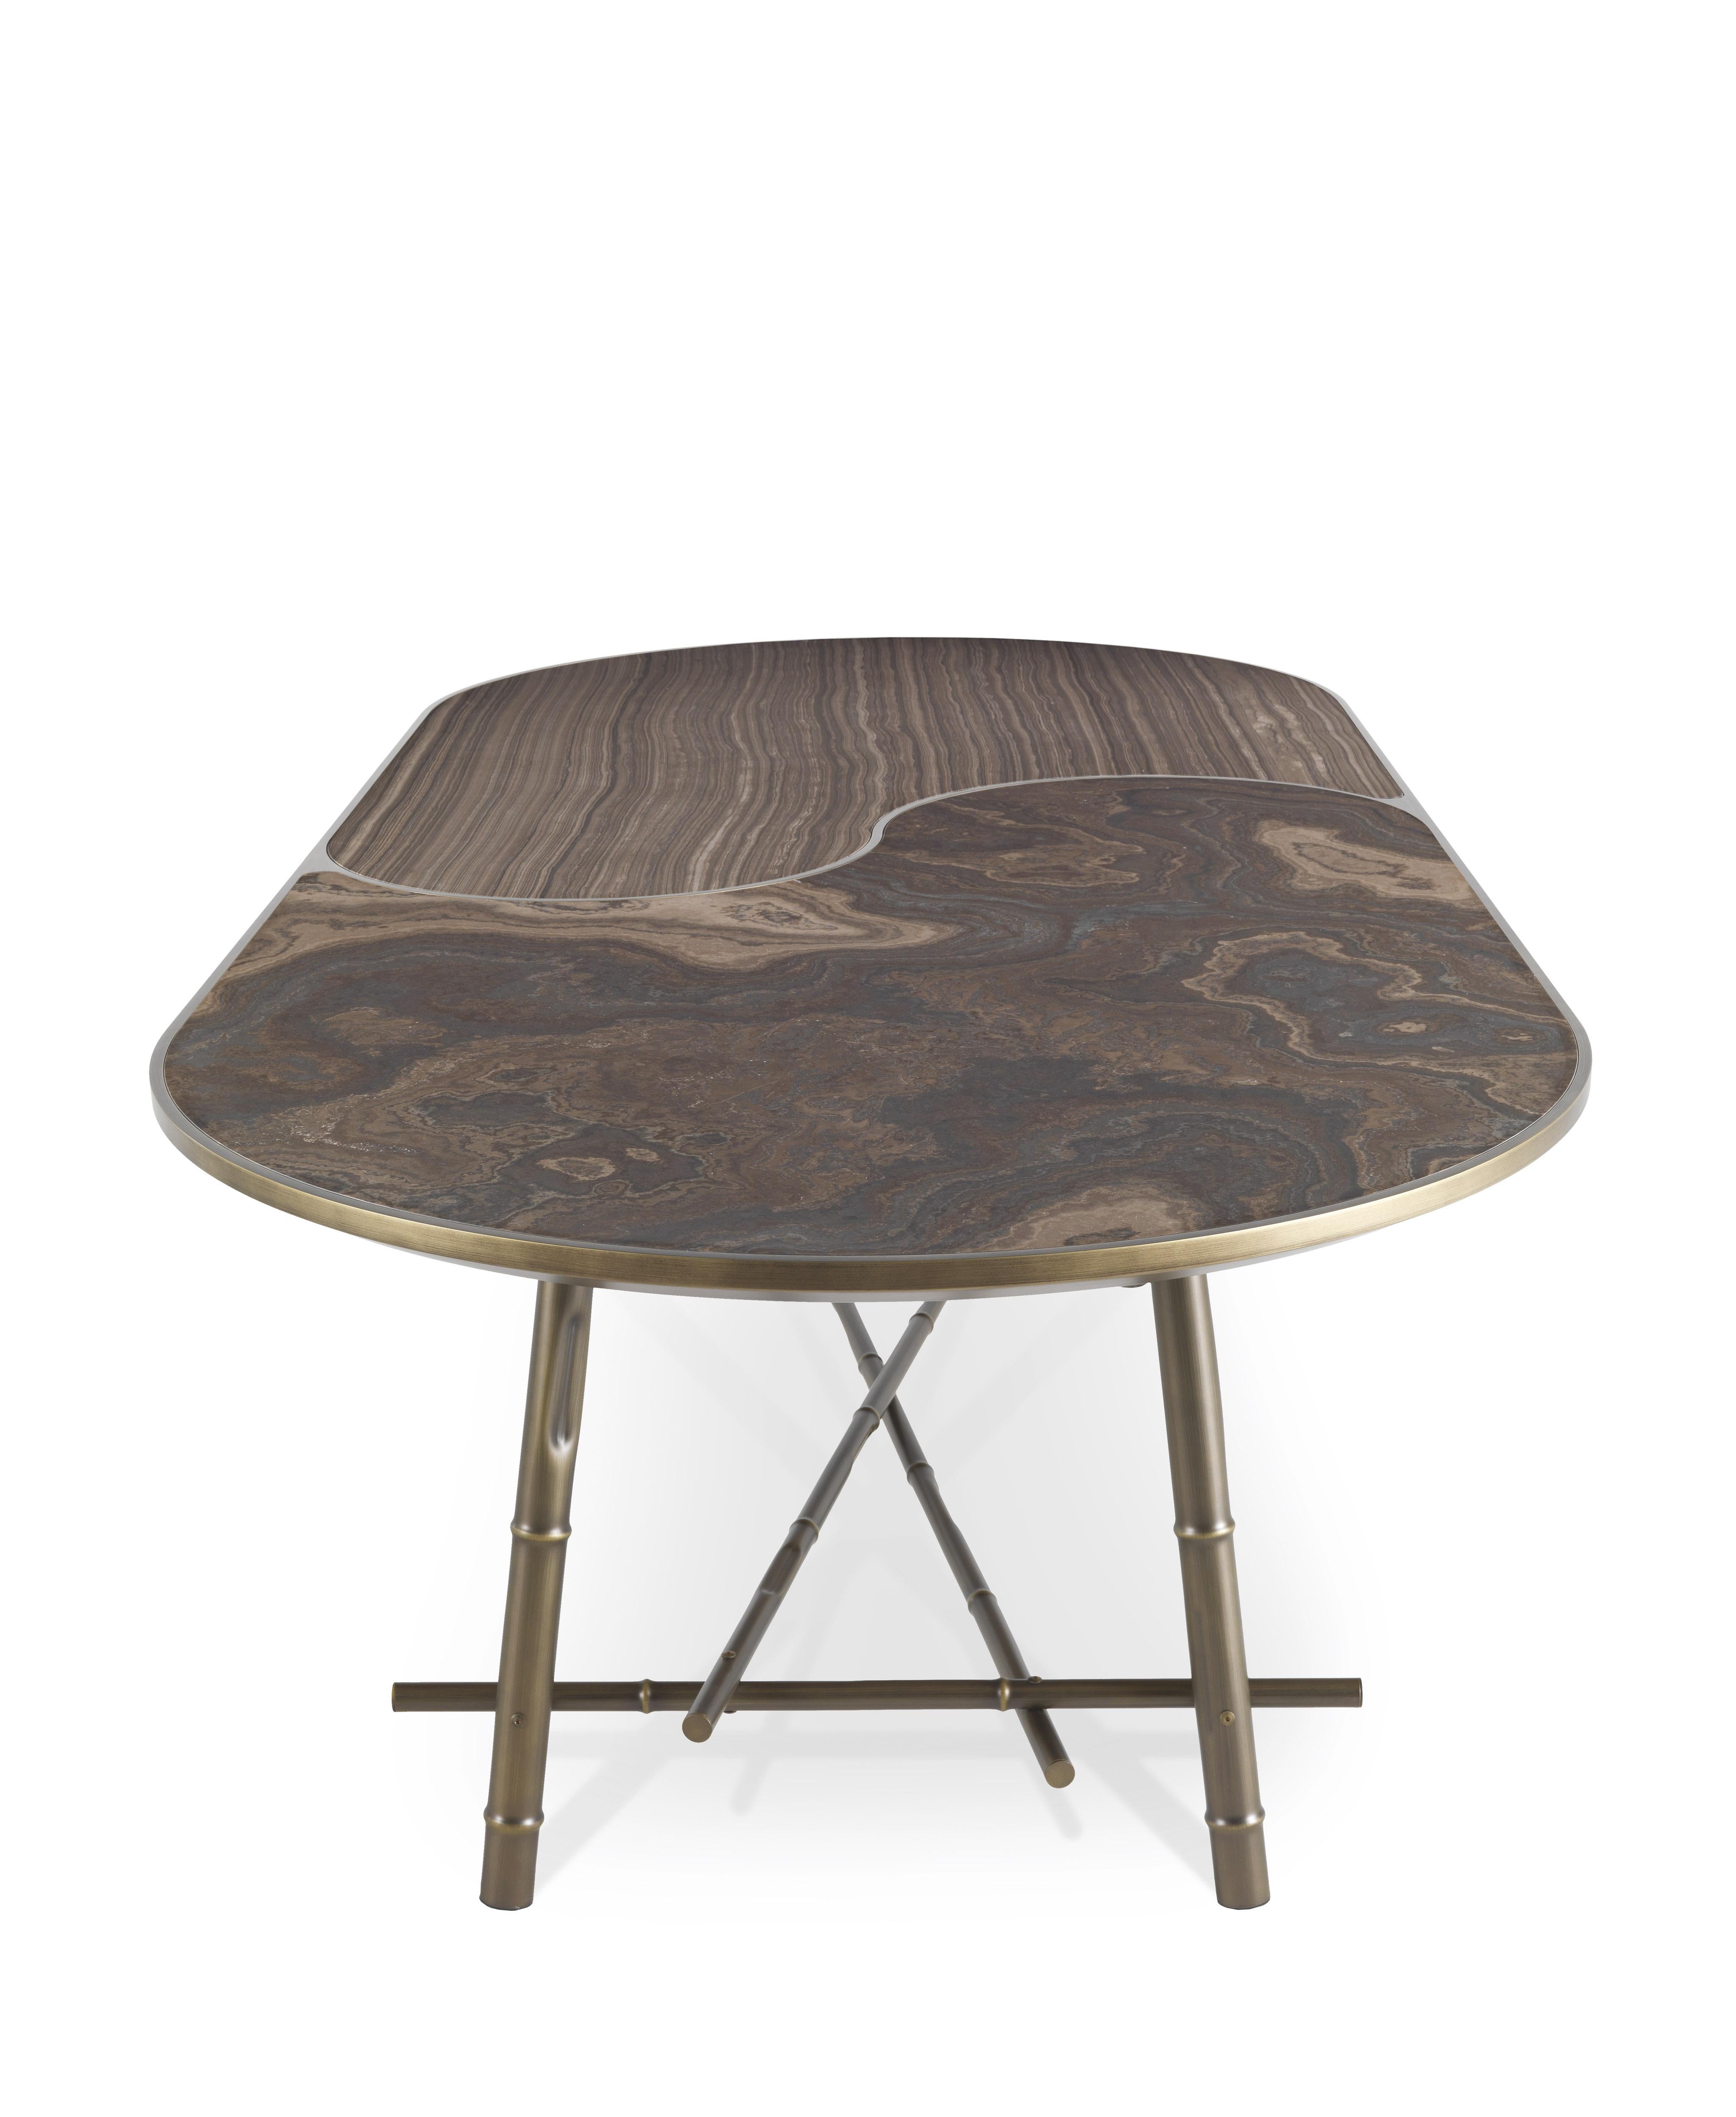 Patinated 21st Century Dalí Oval Dining Table in Metal and Marble by Etro Home Interiors For Sale